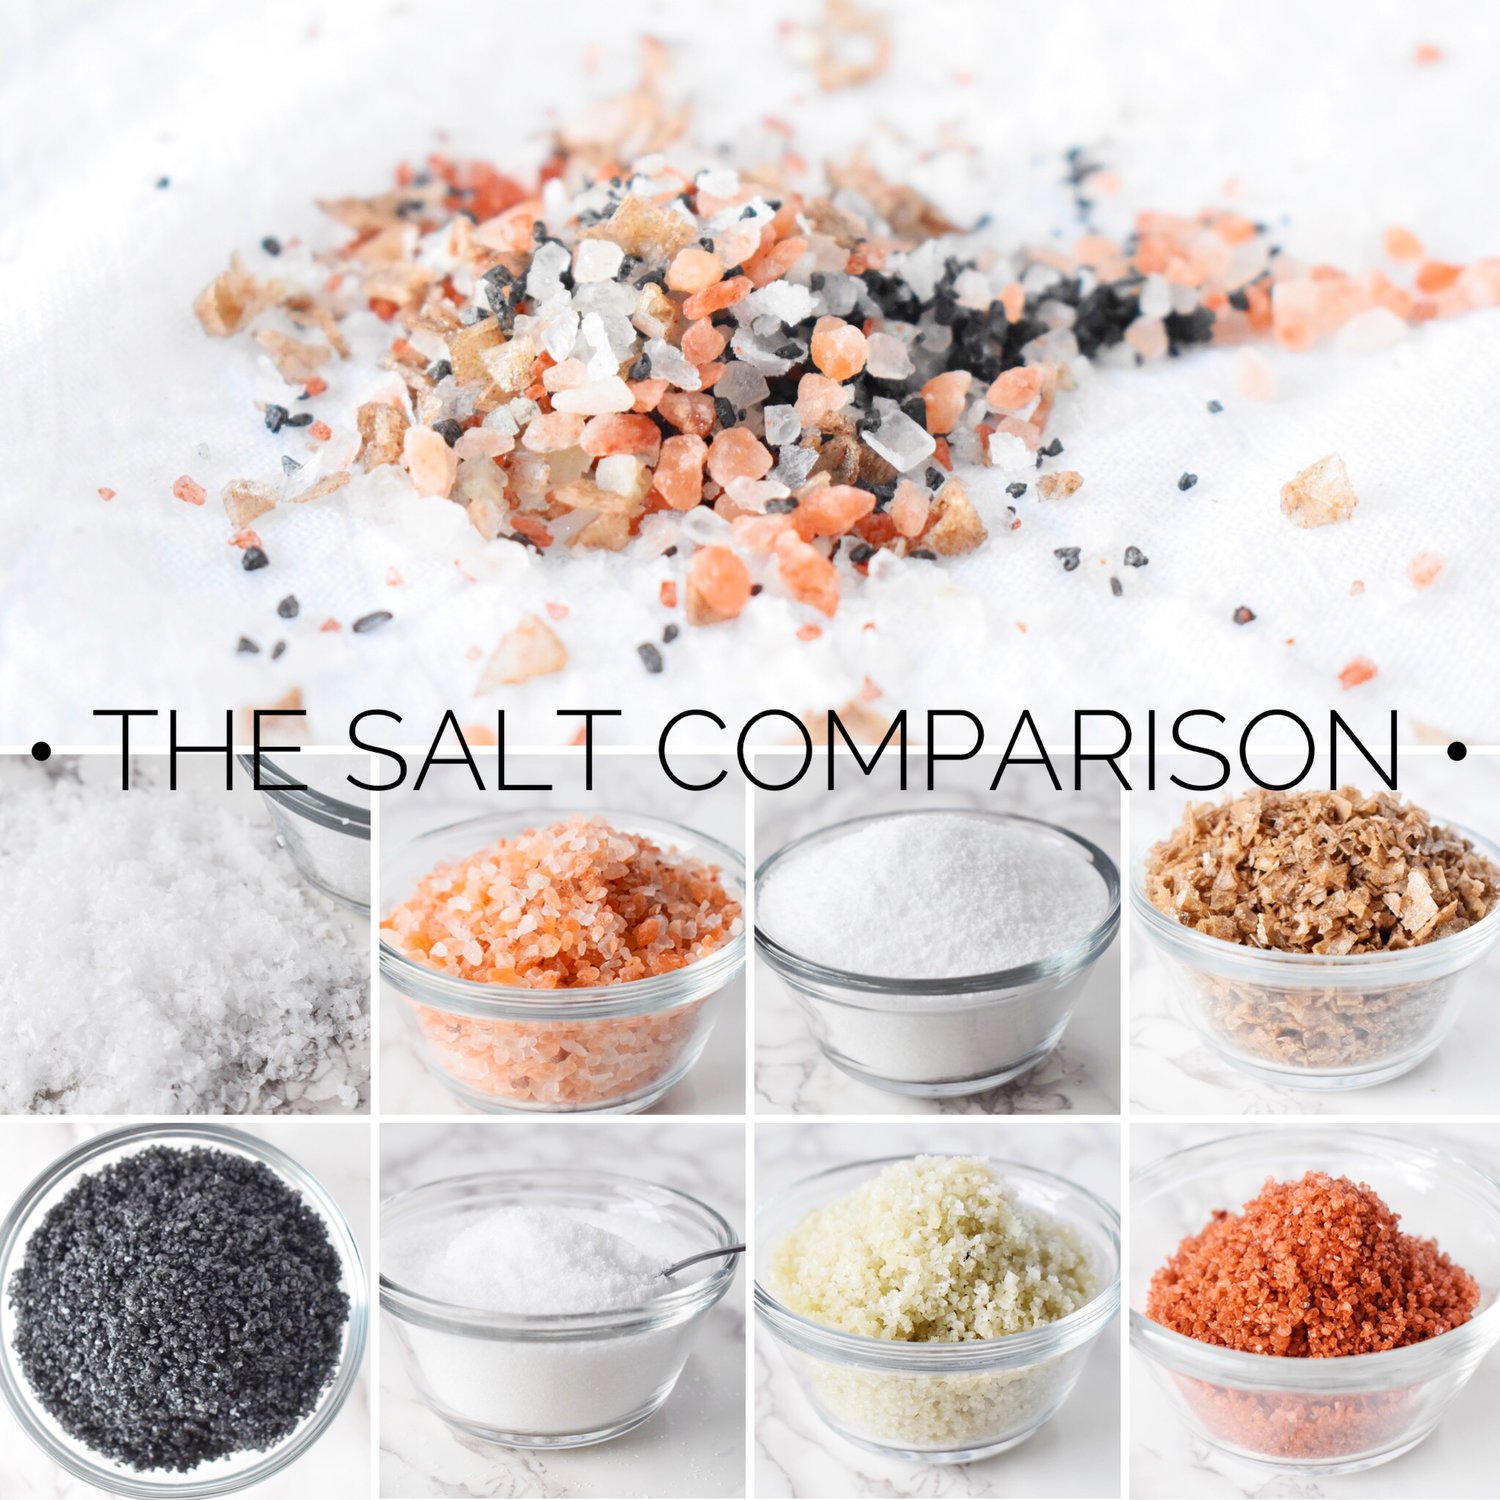 Himalayan vs. Celtic Sea Salt: WHICH IS BETTER? 